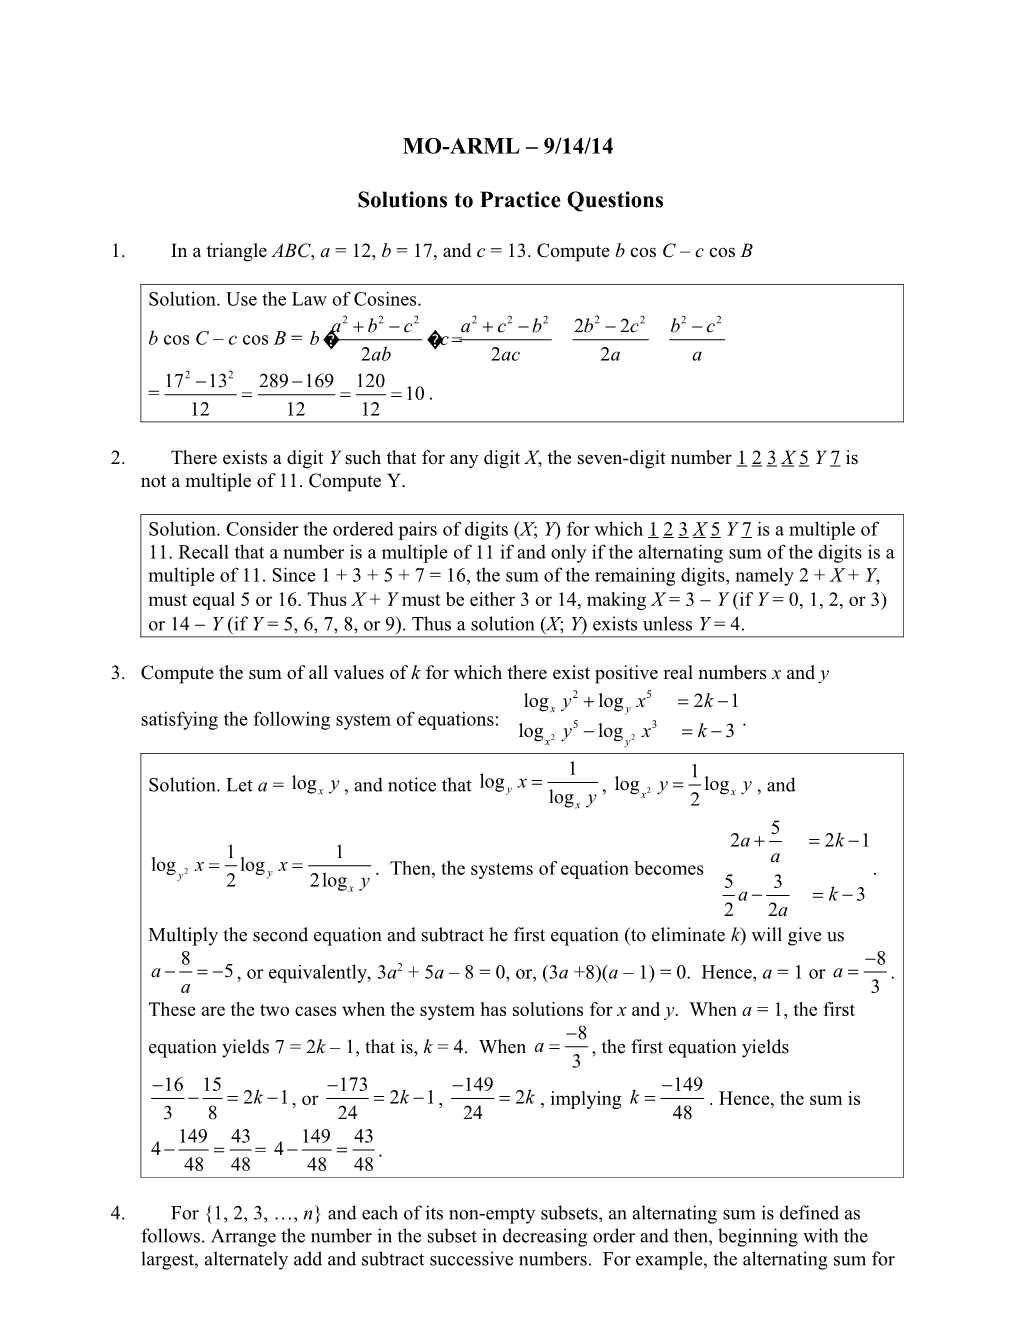 Solutions to Practice Questions